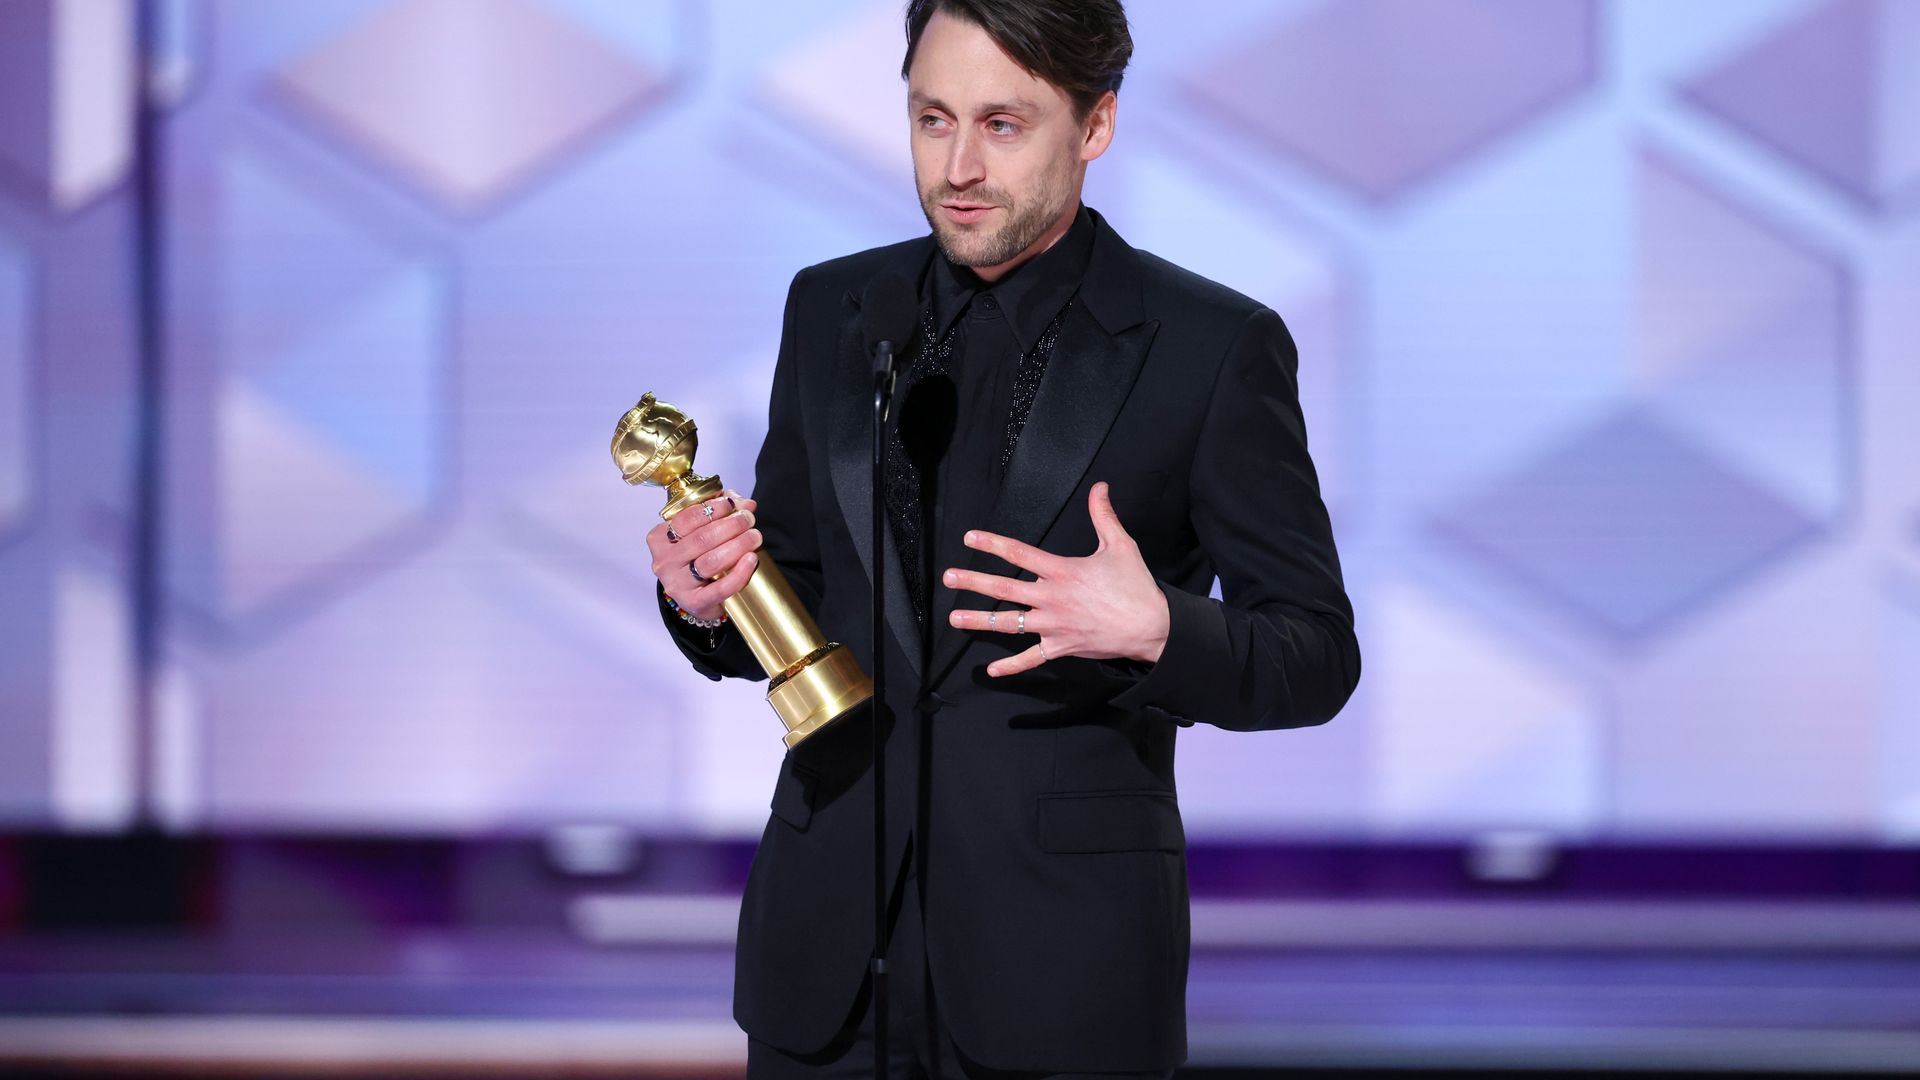 Kieran Culkin pays special homage to his kids as he scoops Golden Globe